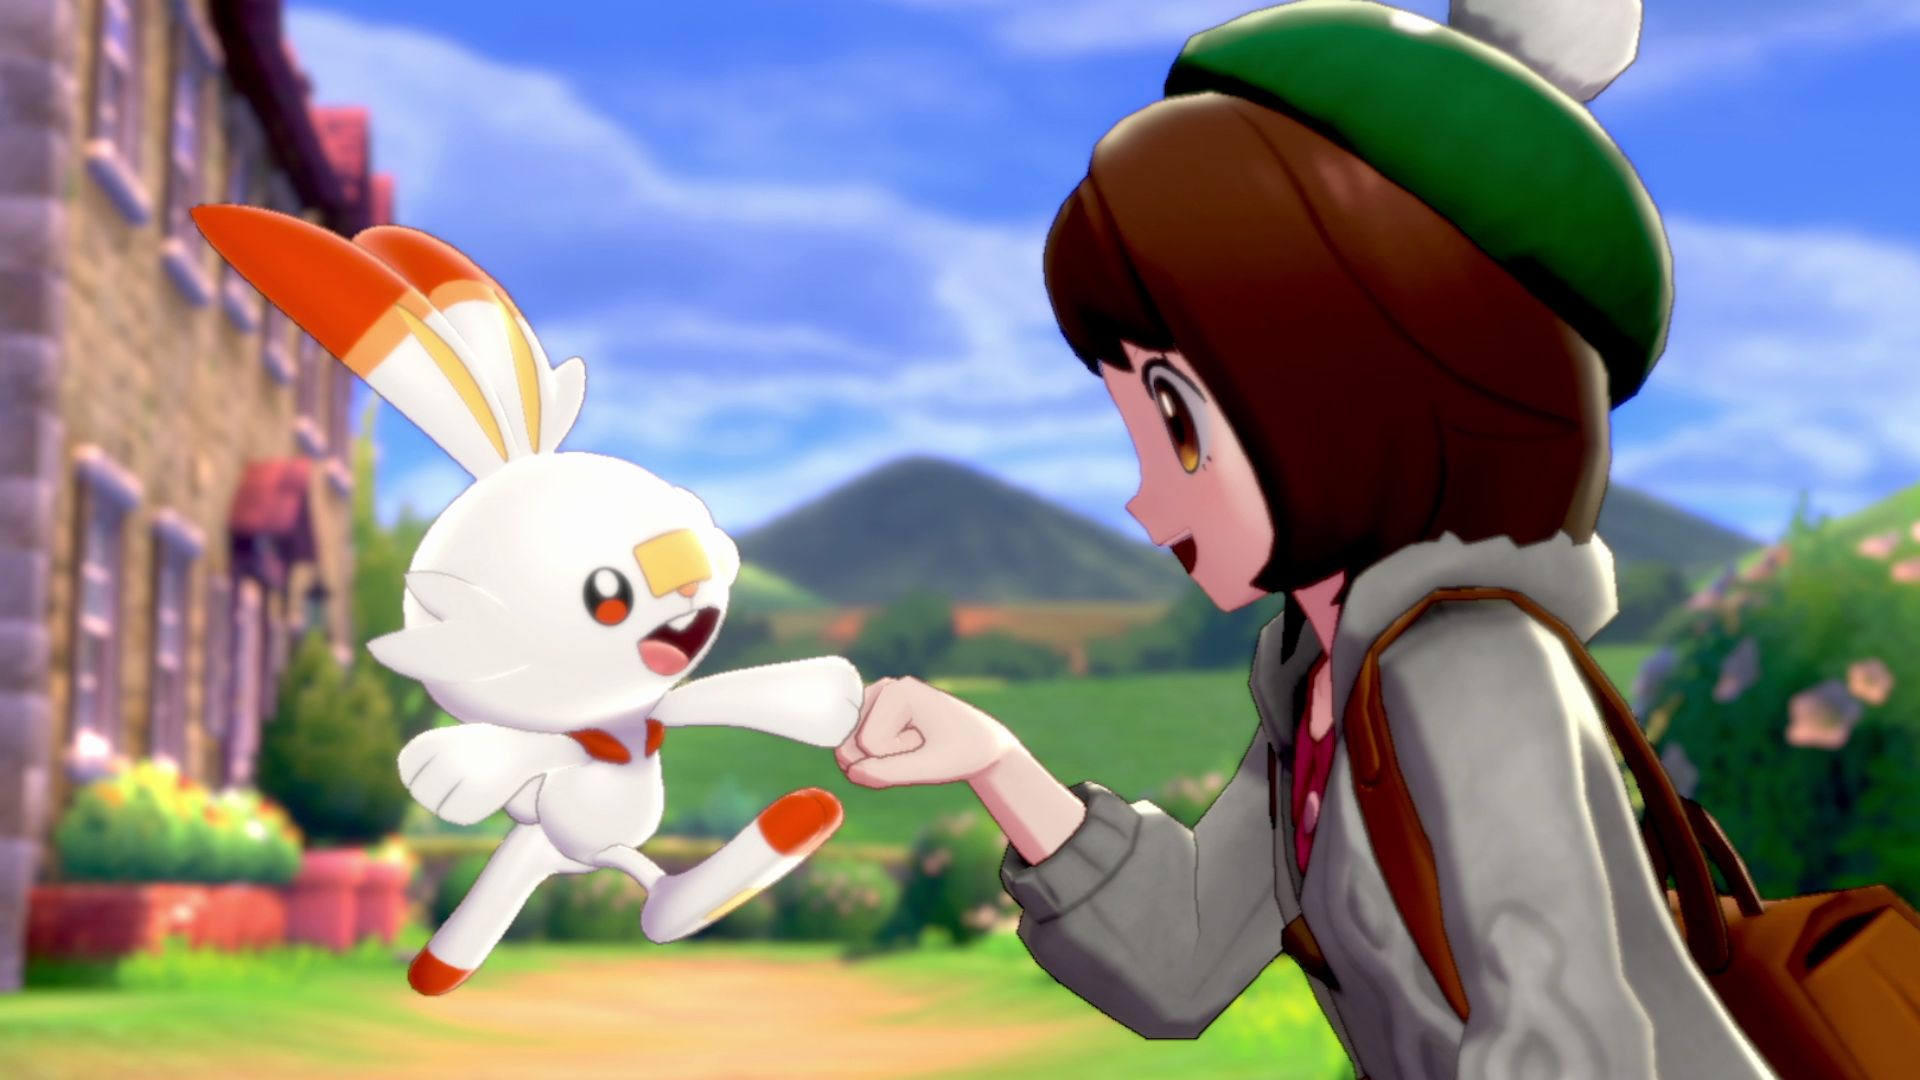 Will there be connectivity between Pokemon Go and Pokemon Sword Shield? -  Dexerto